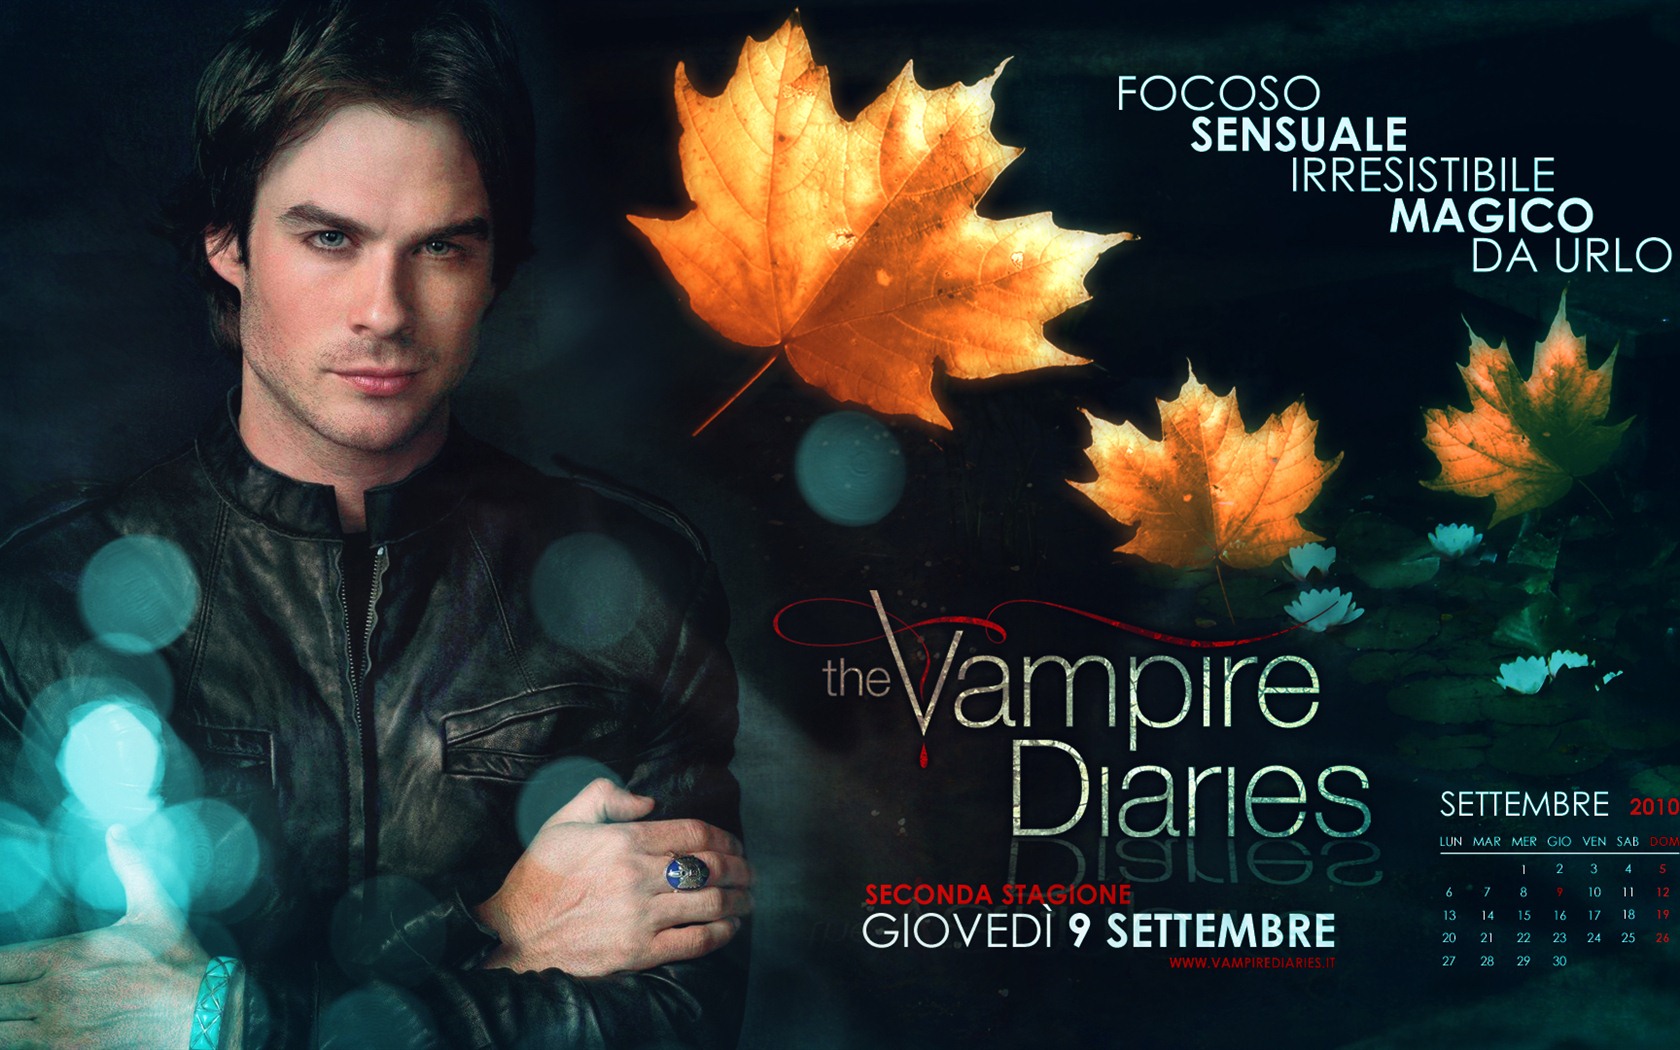 The Vampire Diaries HD wallpapers #16 - 1680x1050